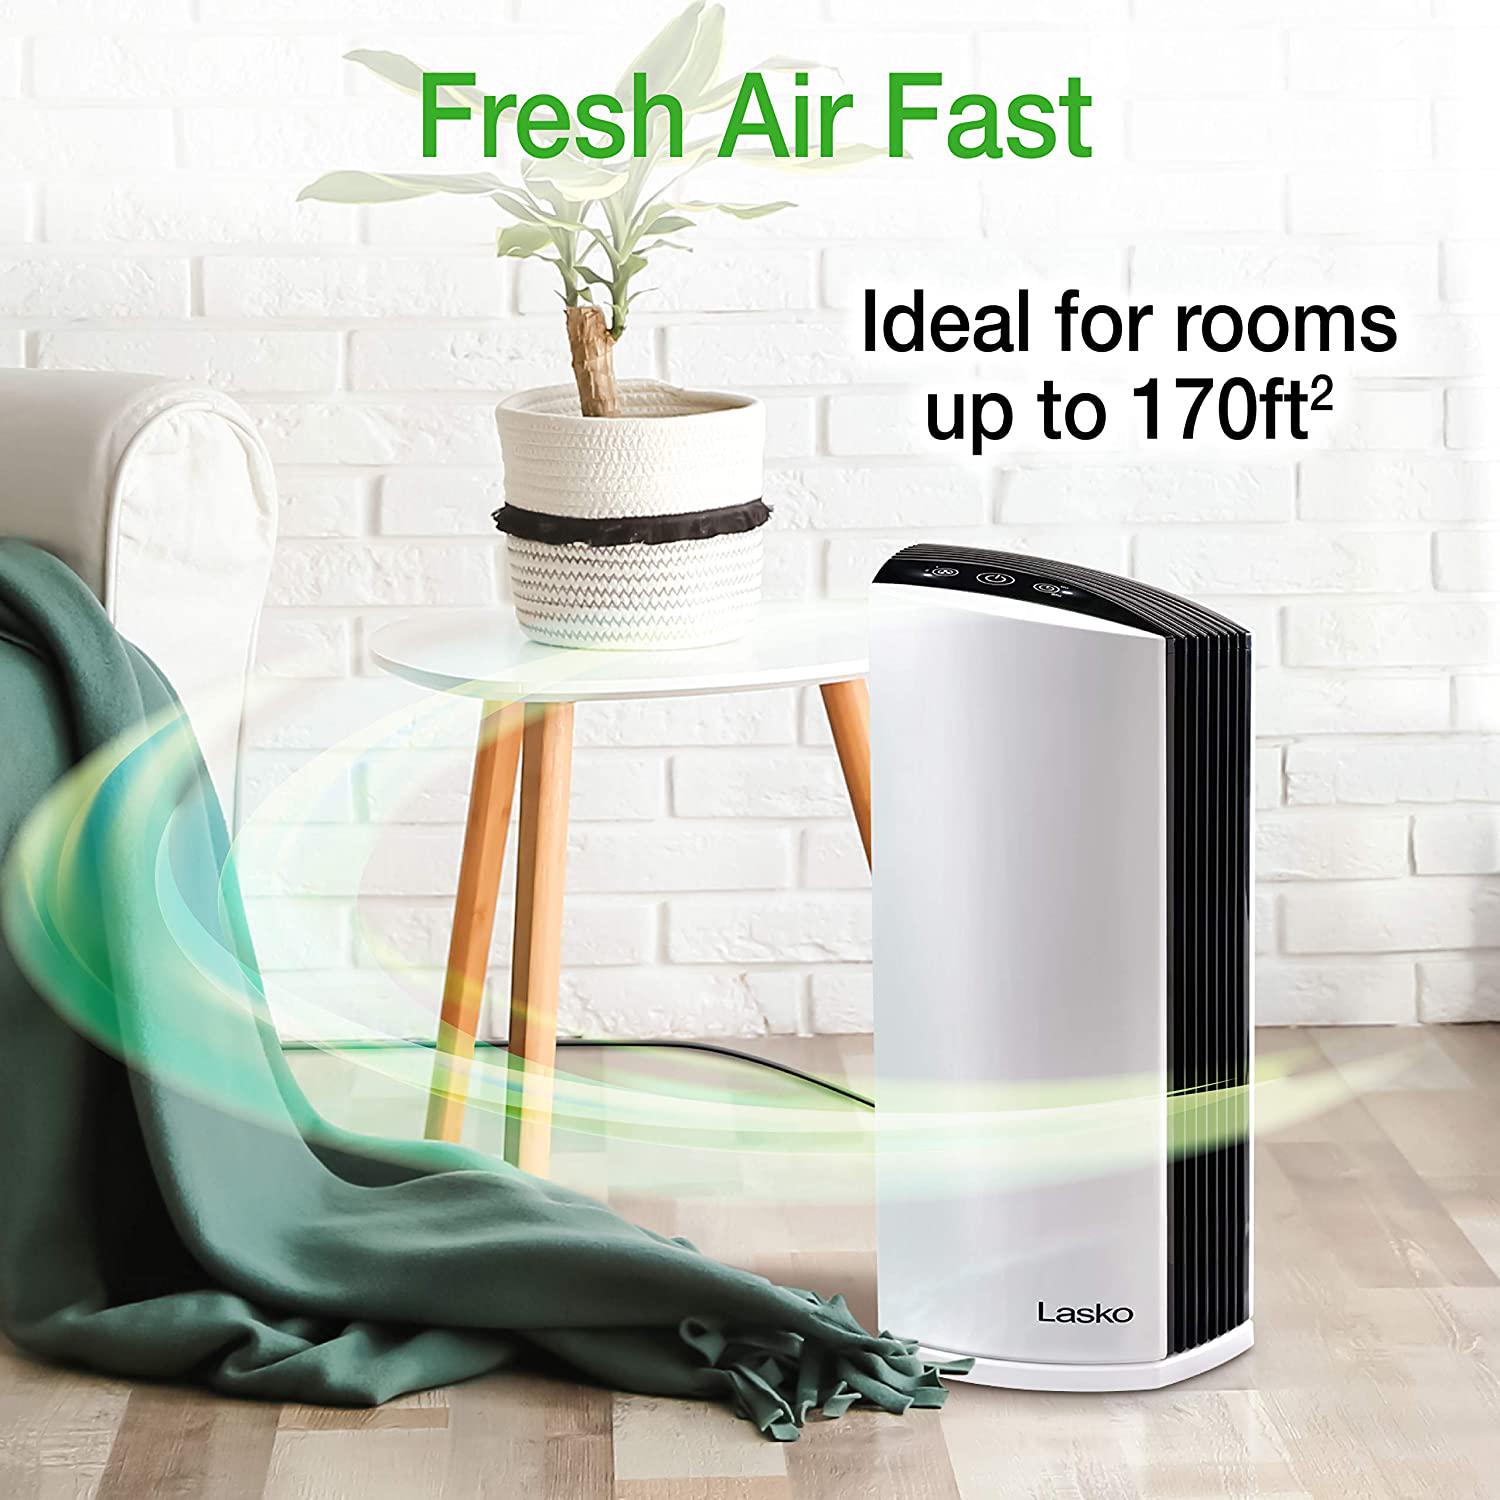 Lasko LP300 HEPA Tower Air Purifier with Timer for a Cleaner， Fresher Home Environment， LP300， White